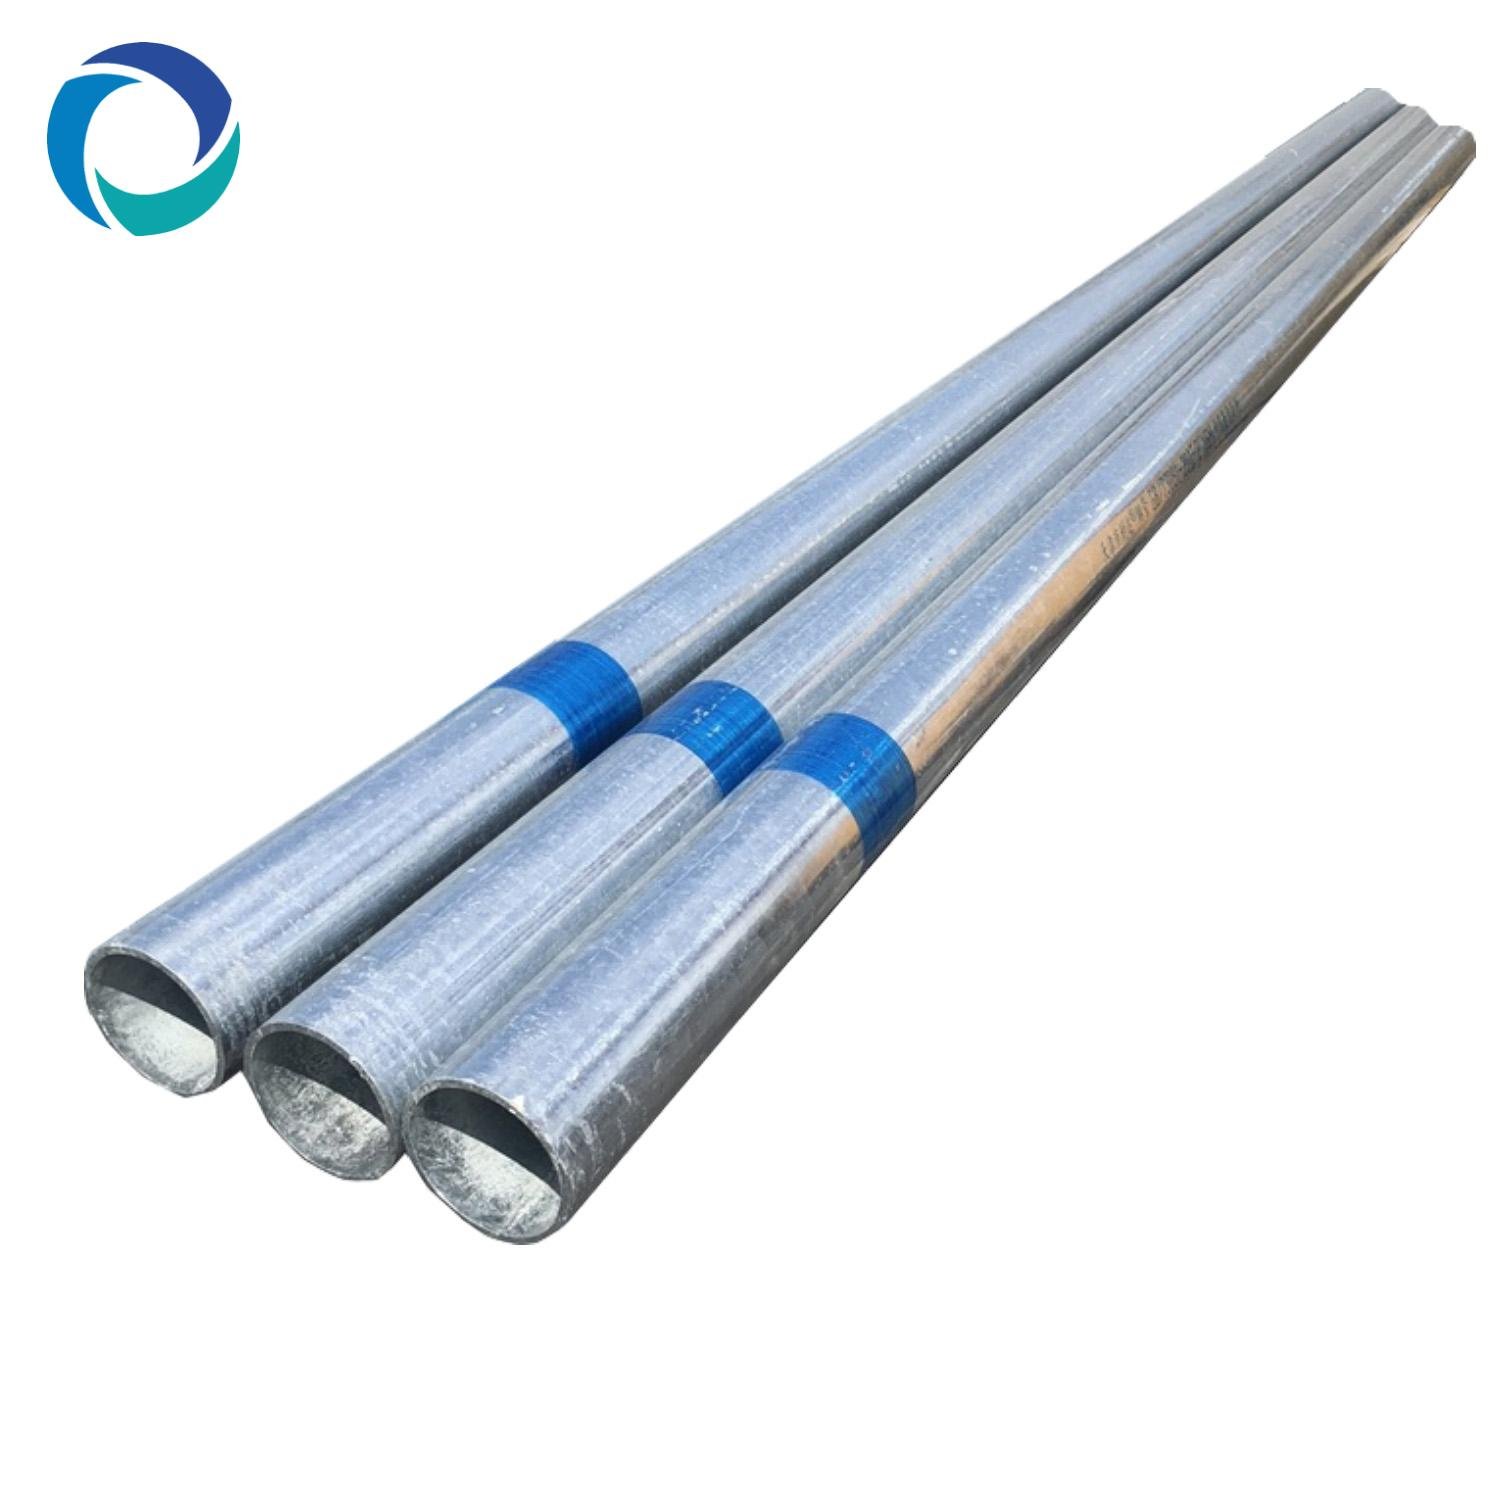 carbon steel blue band 1.75 galvanized pipe 3